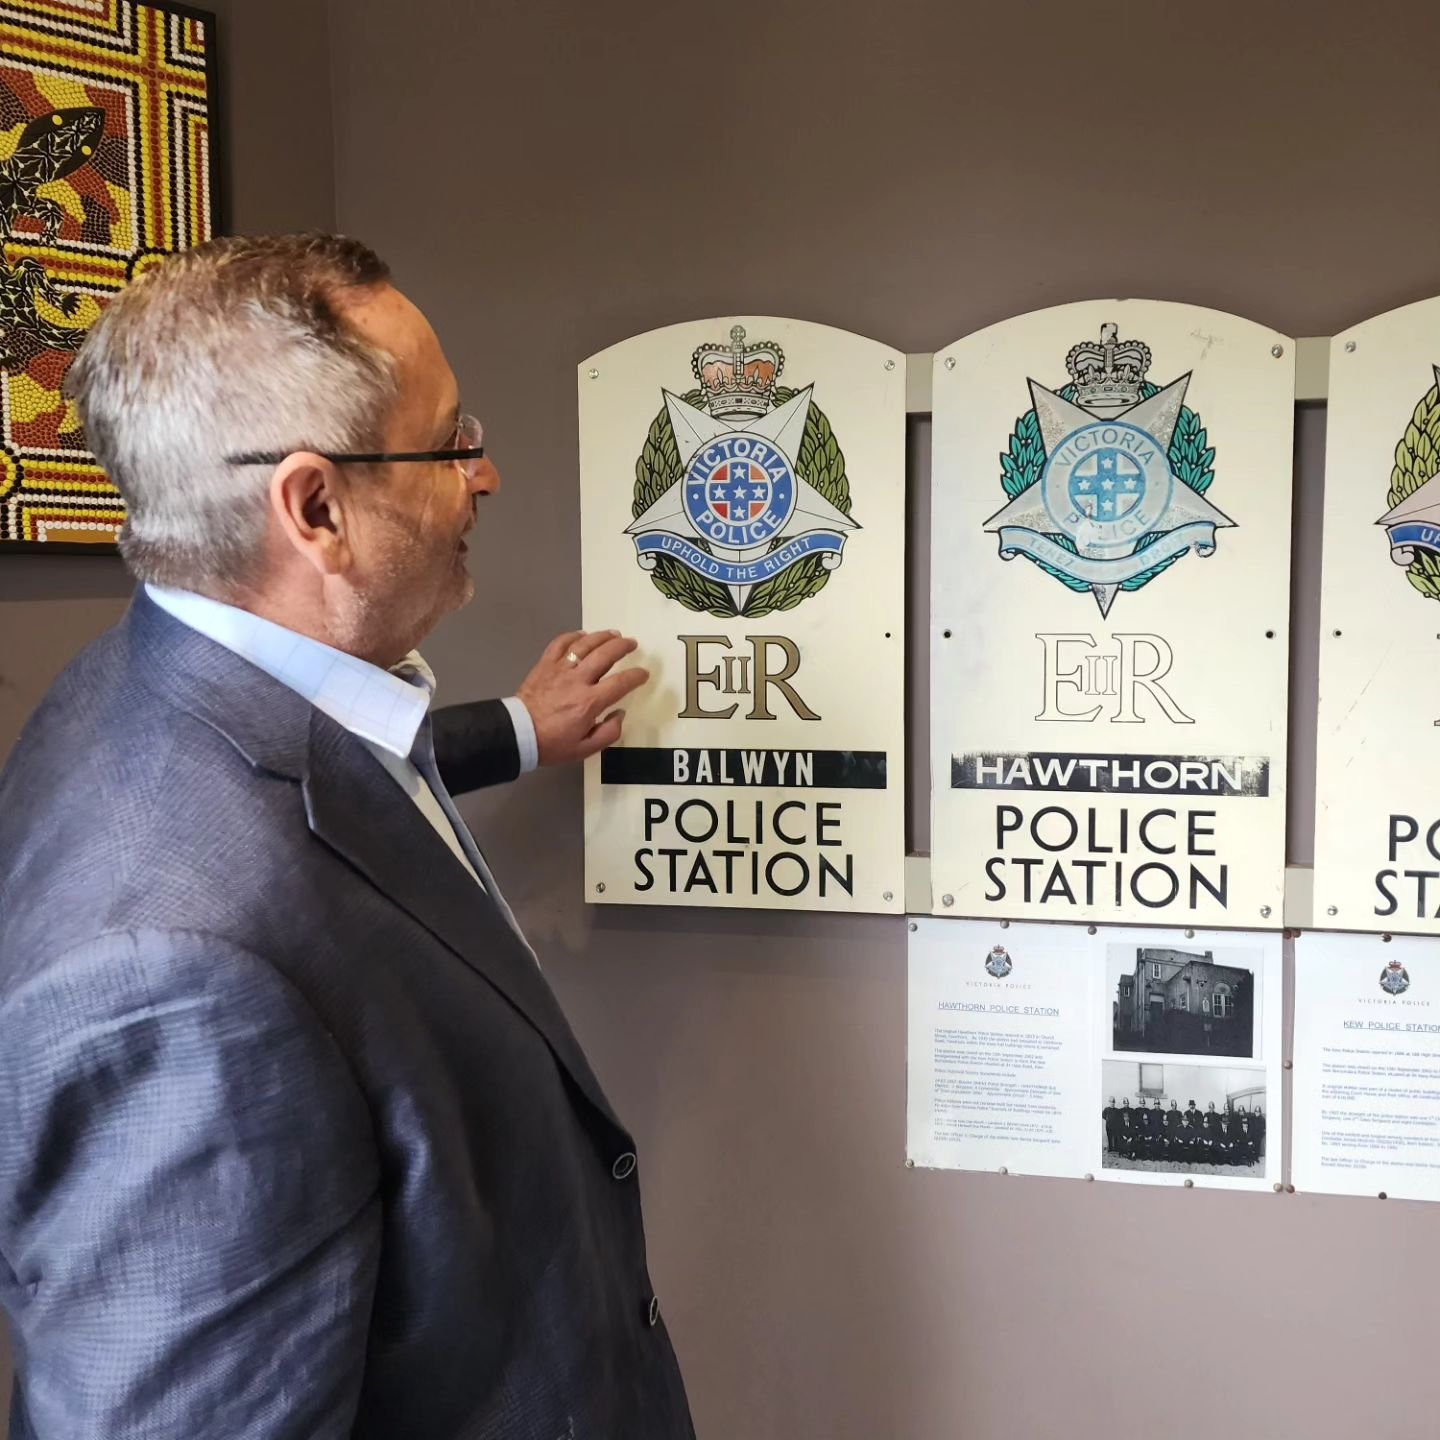 Boroondara Police Station's team of over forty dedicated members keep us safe 24-7.

Today I joined the Minister for Police @anthonycarbinesmp, to chat with their team about the complex issues they face everyday.

It was great to speak to the Constab